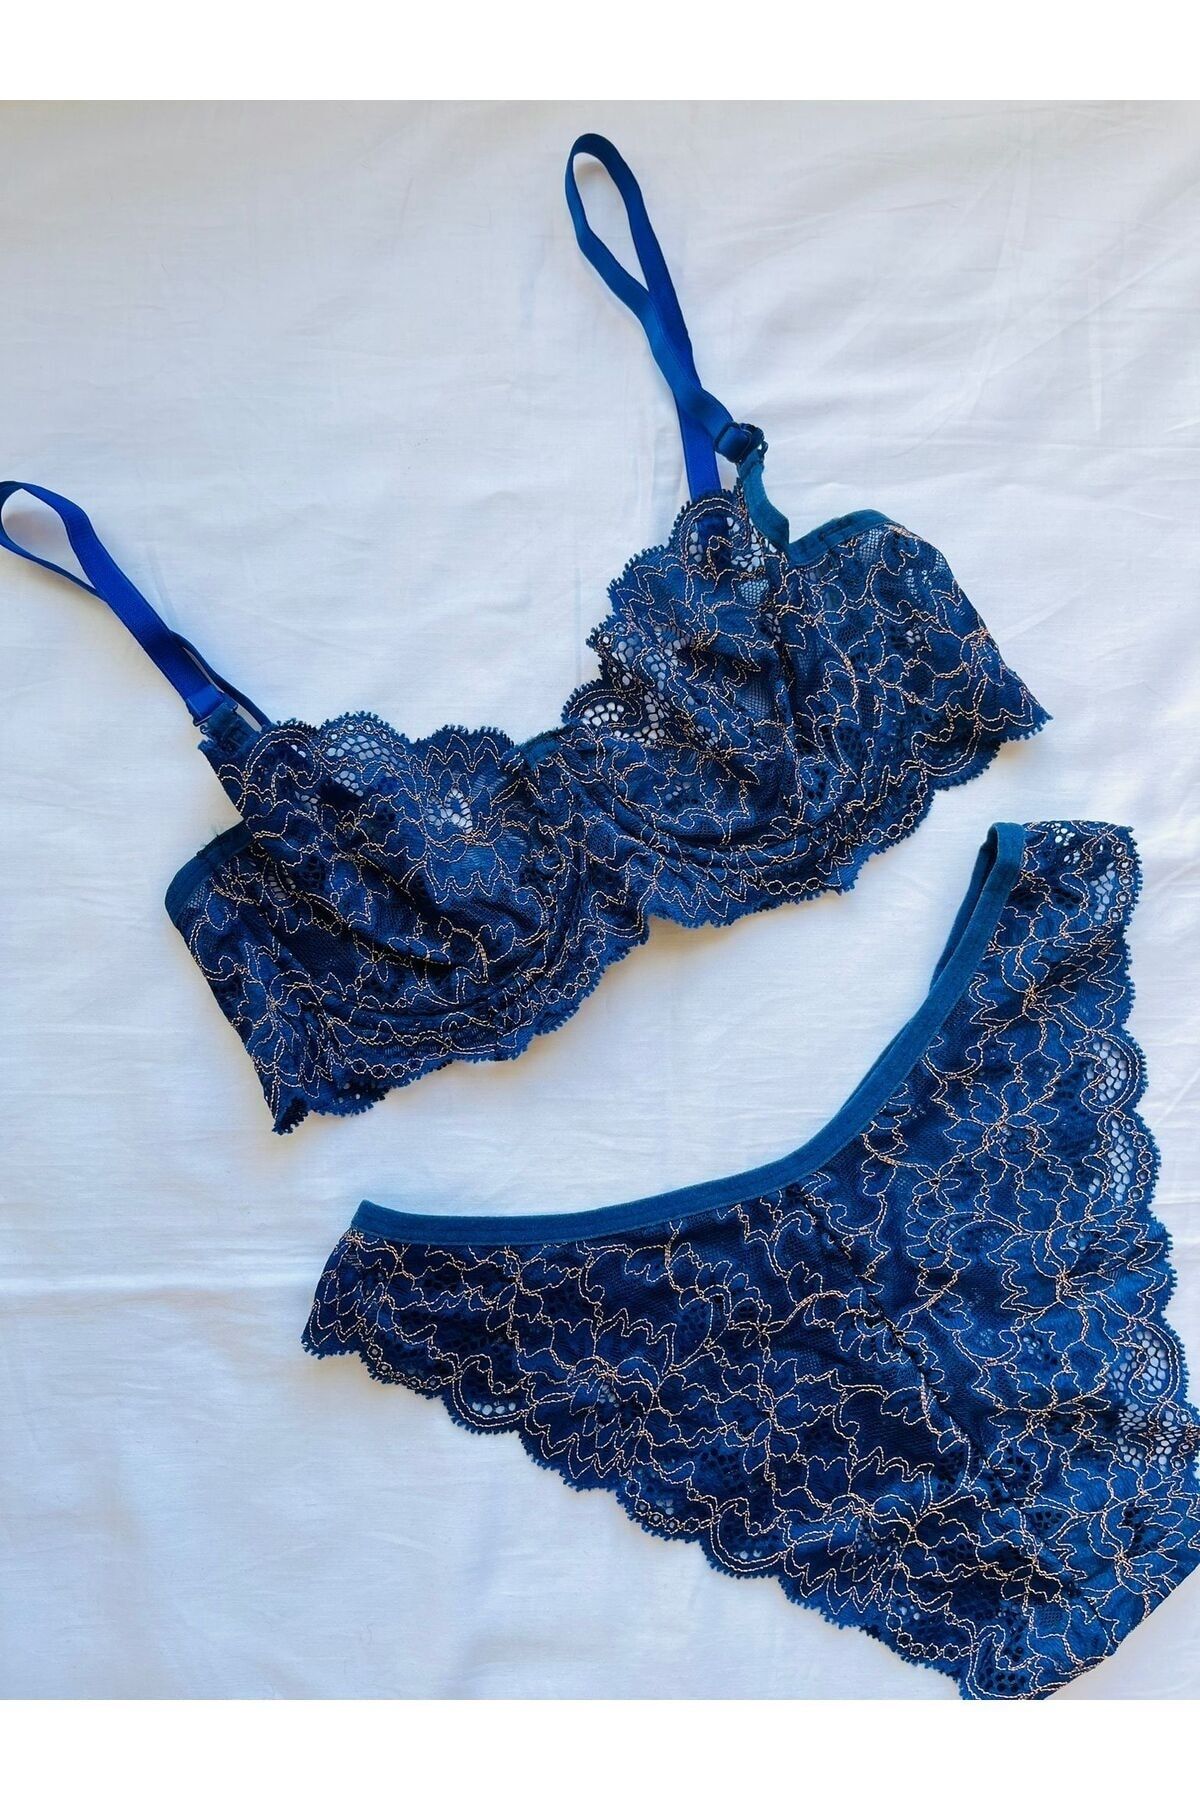 Blue and yellow lingerie set